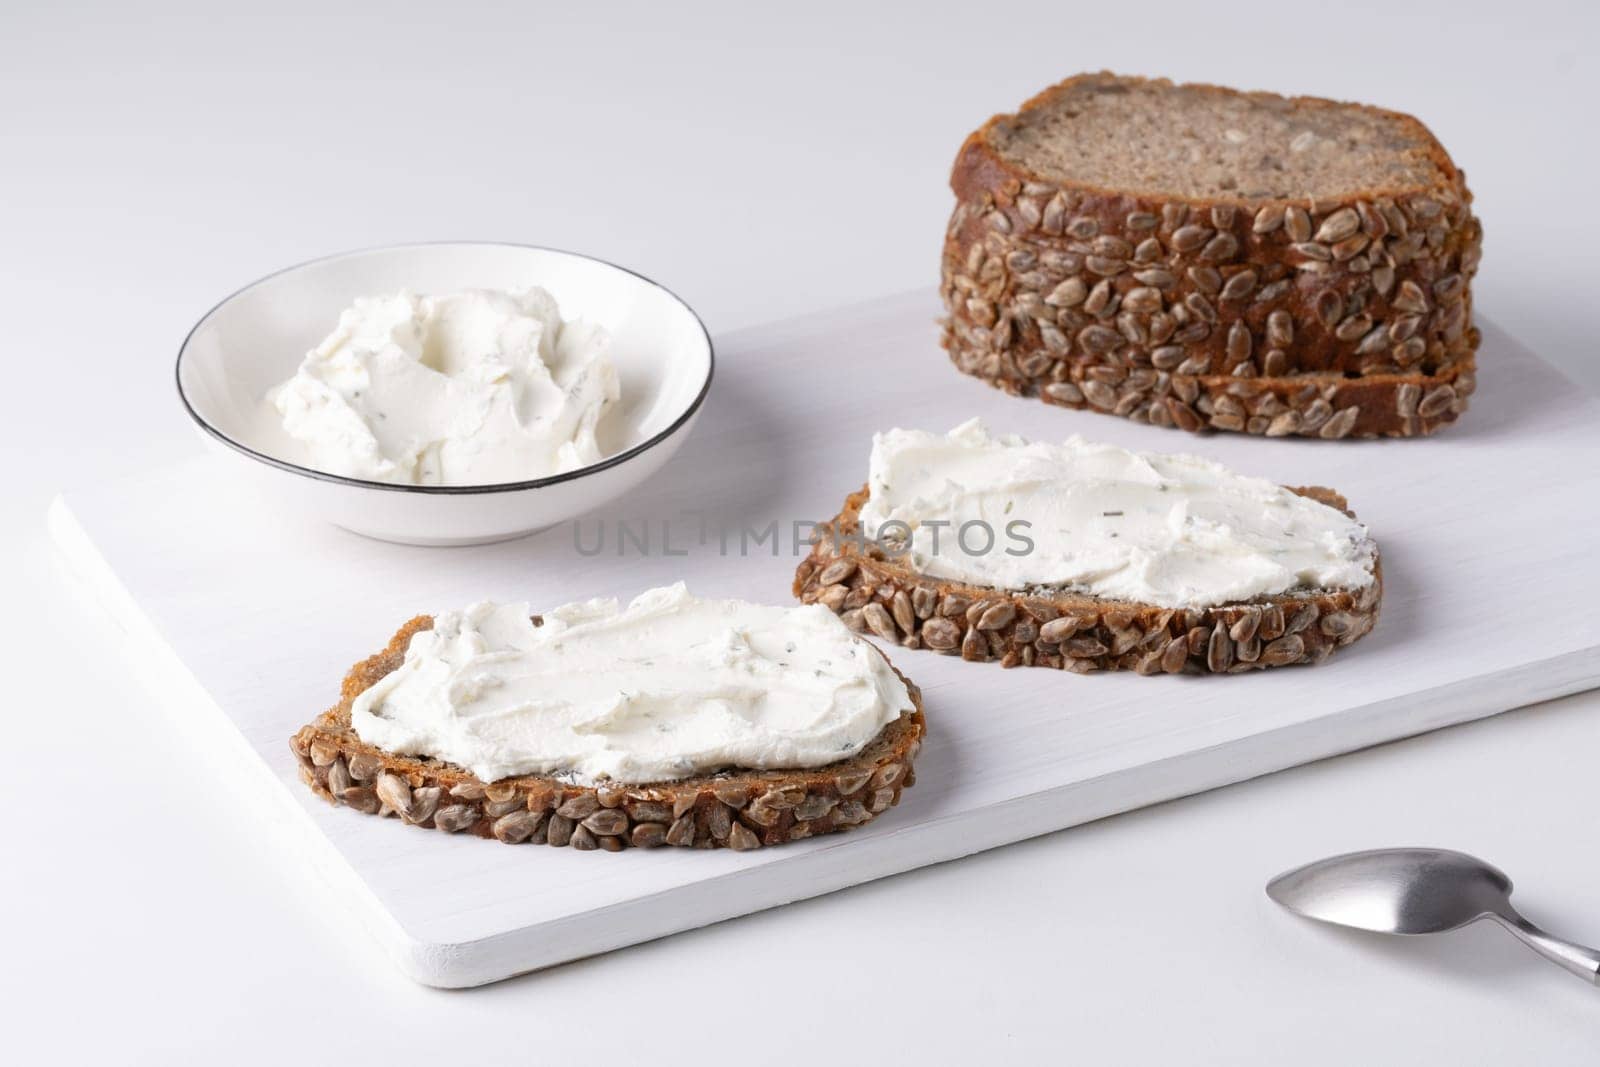 Rye bread with cream cheese on white table. Whole grain rye bread with seeds.